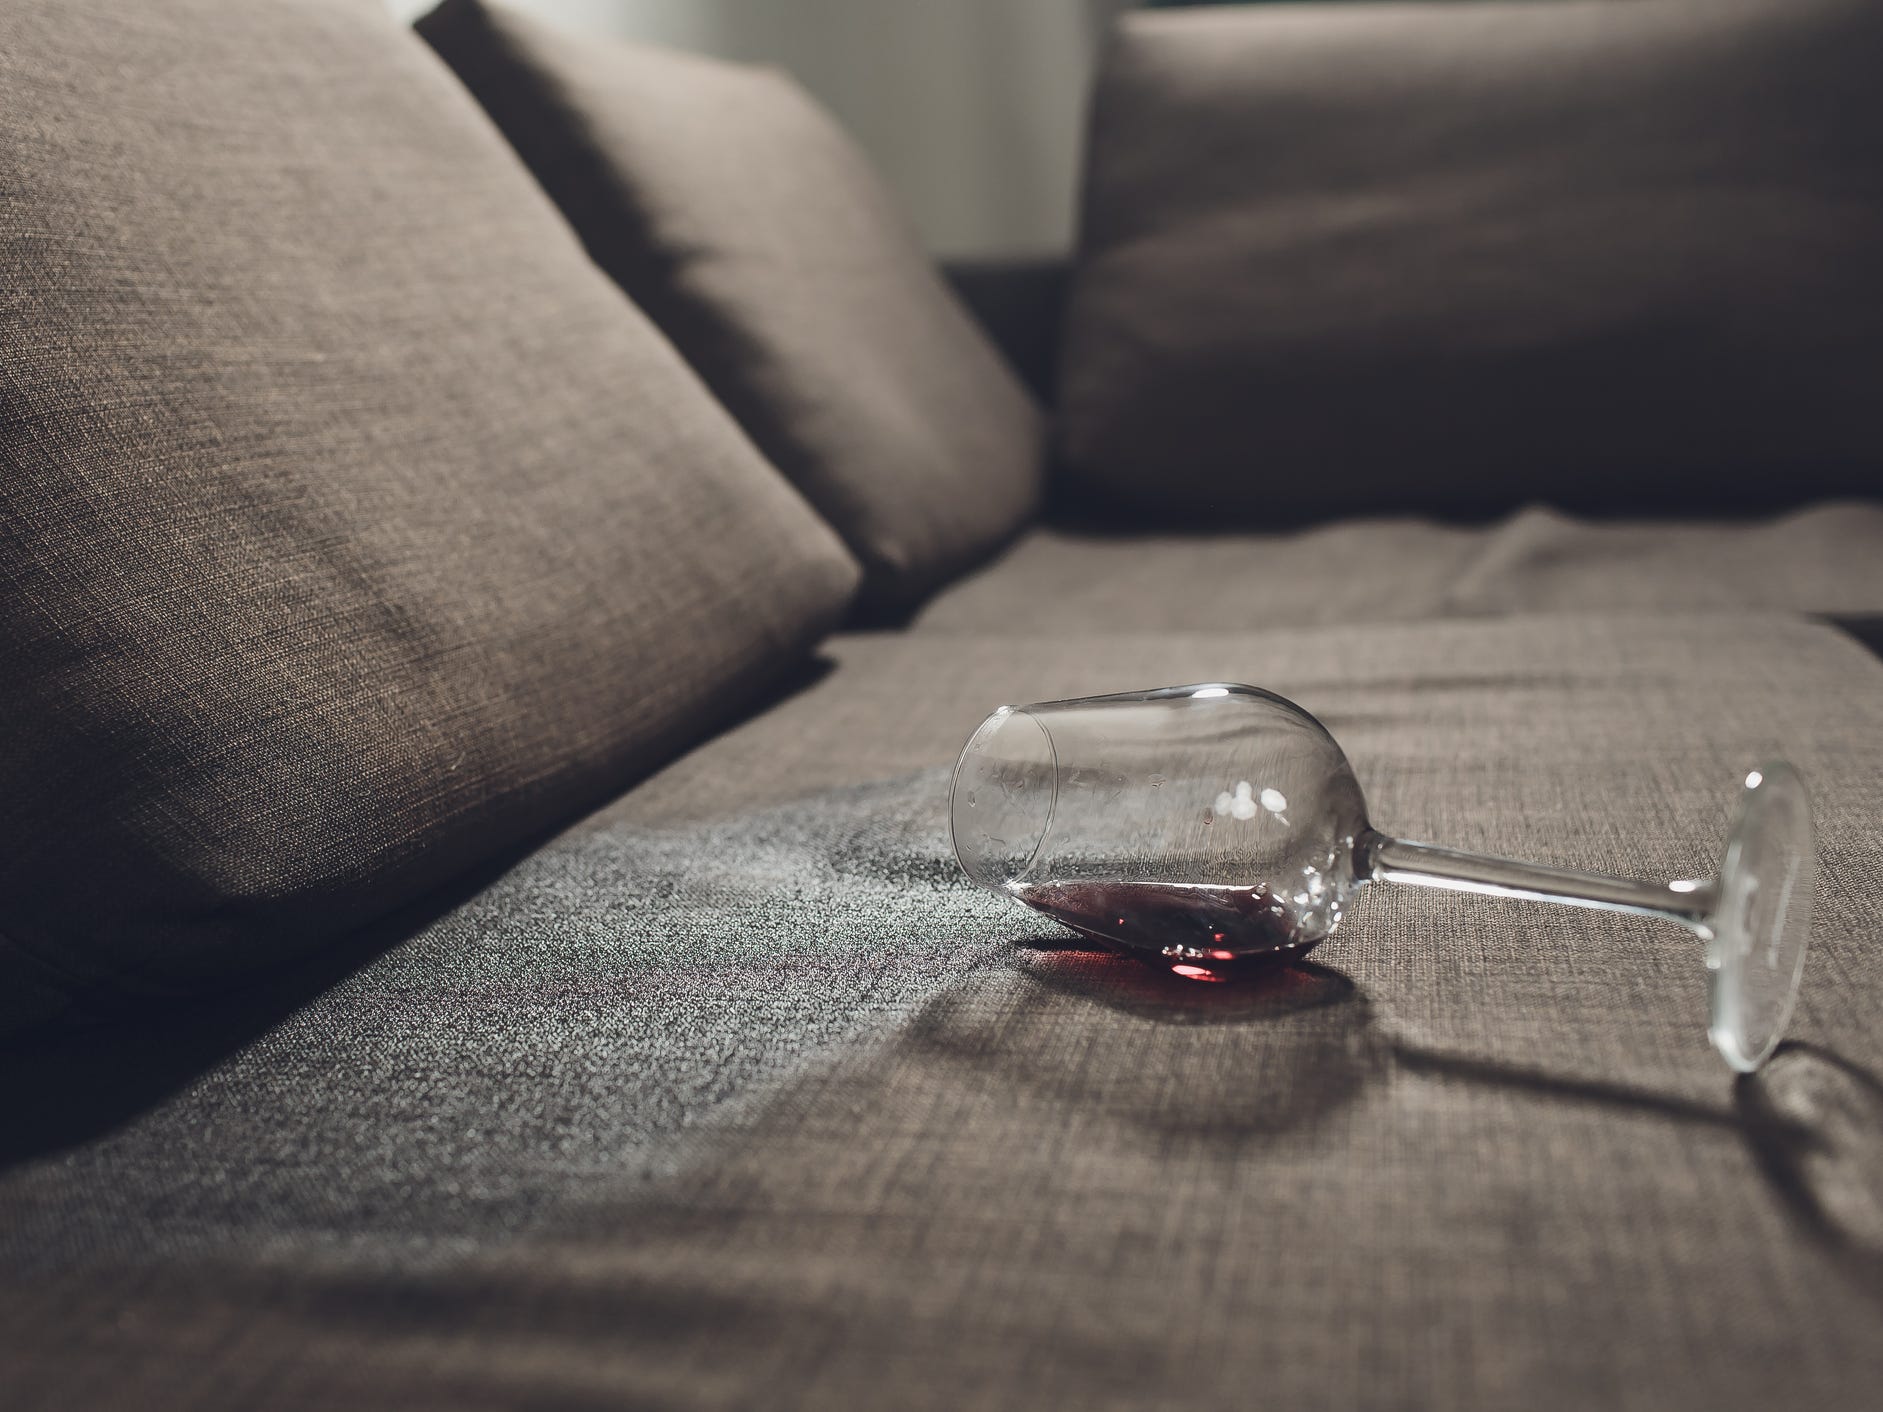 Red wine spilled on a couch